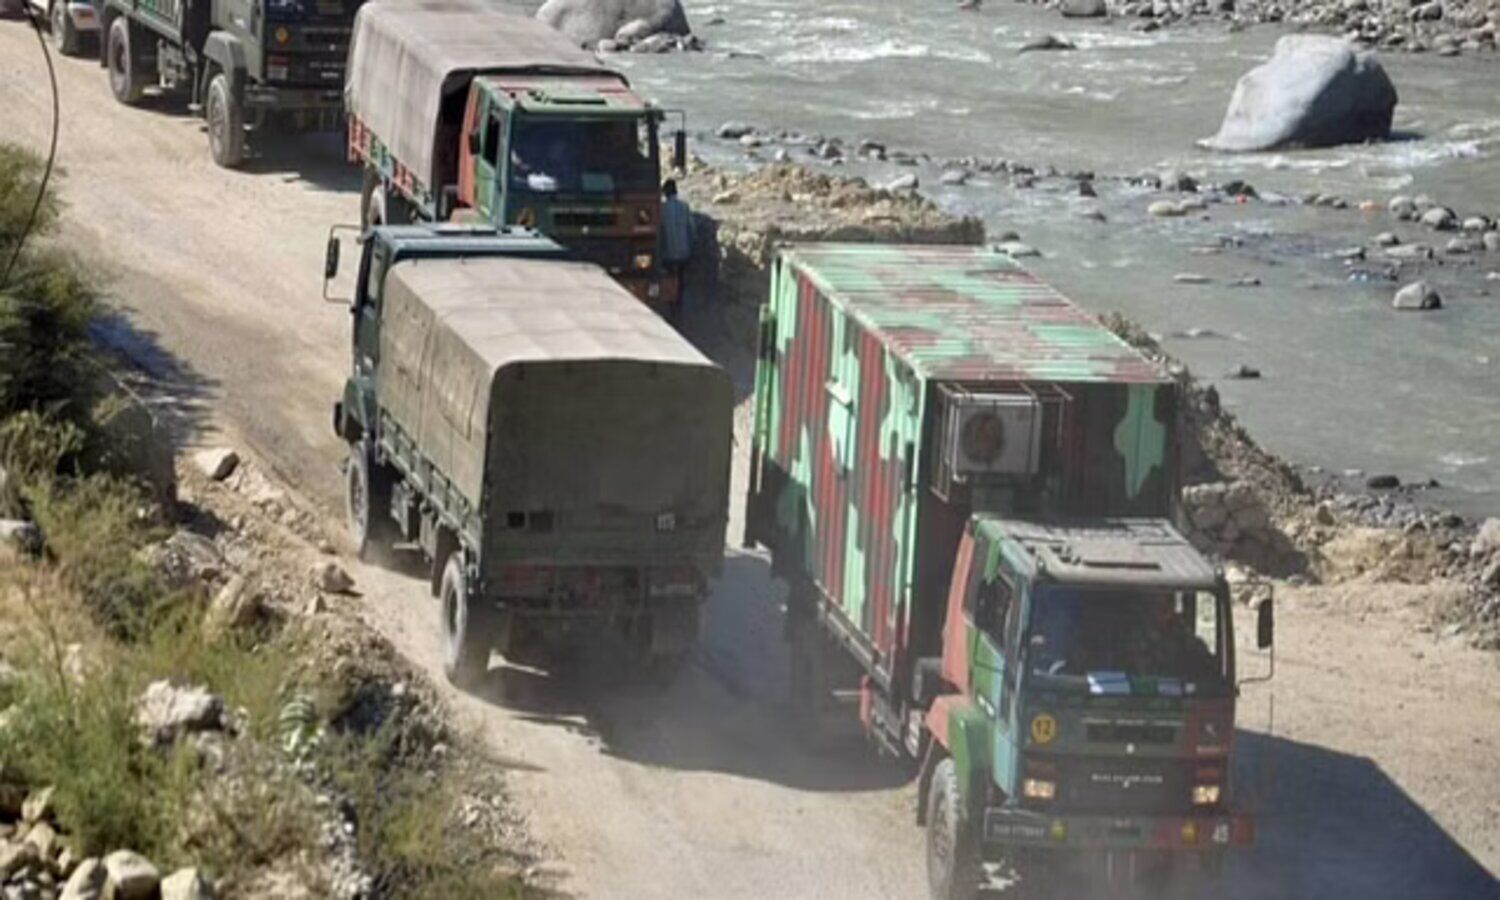 India China Border: Indian Army’s skill shown near China border, bridge ready in a few hours on Indus river